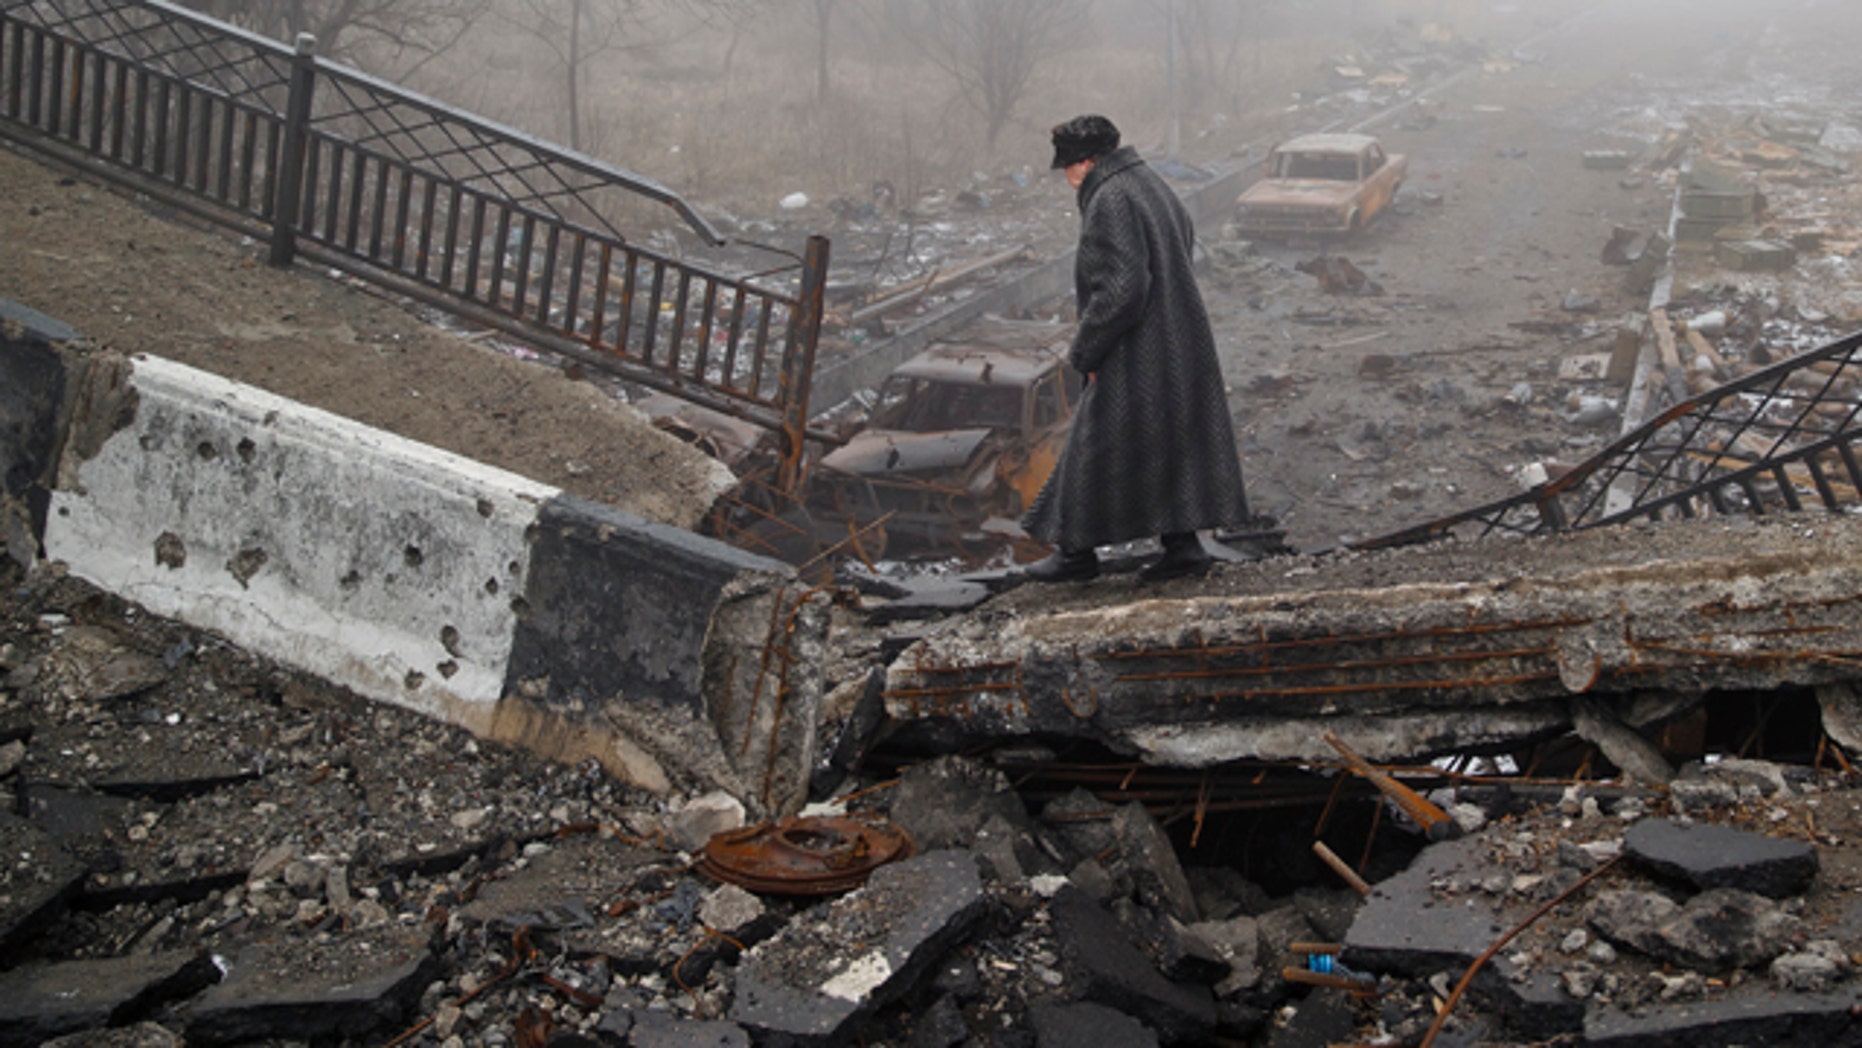 Death toll in eastern Ukraine conflict tops 6,000, UN human rights